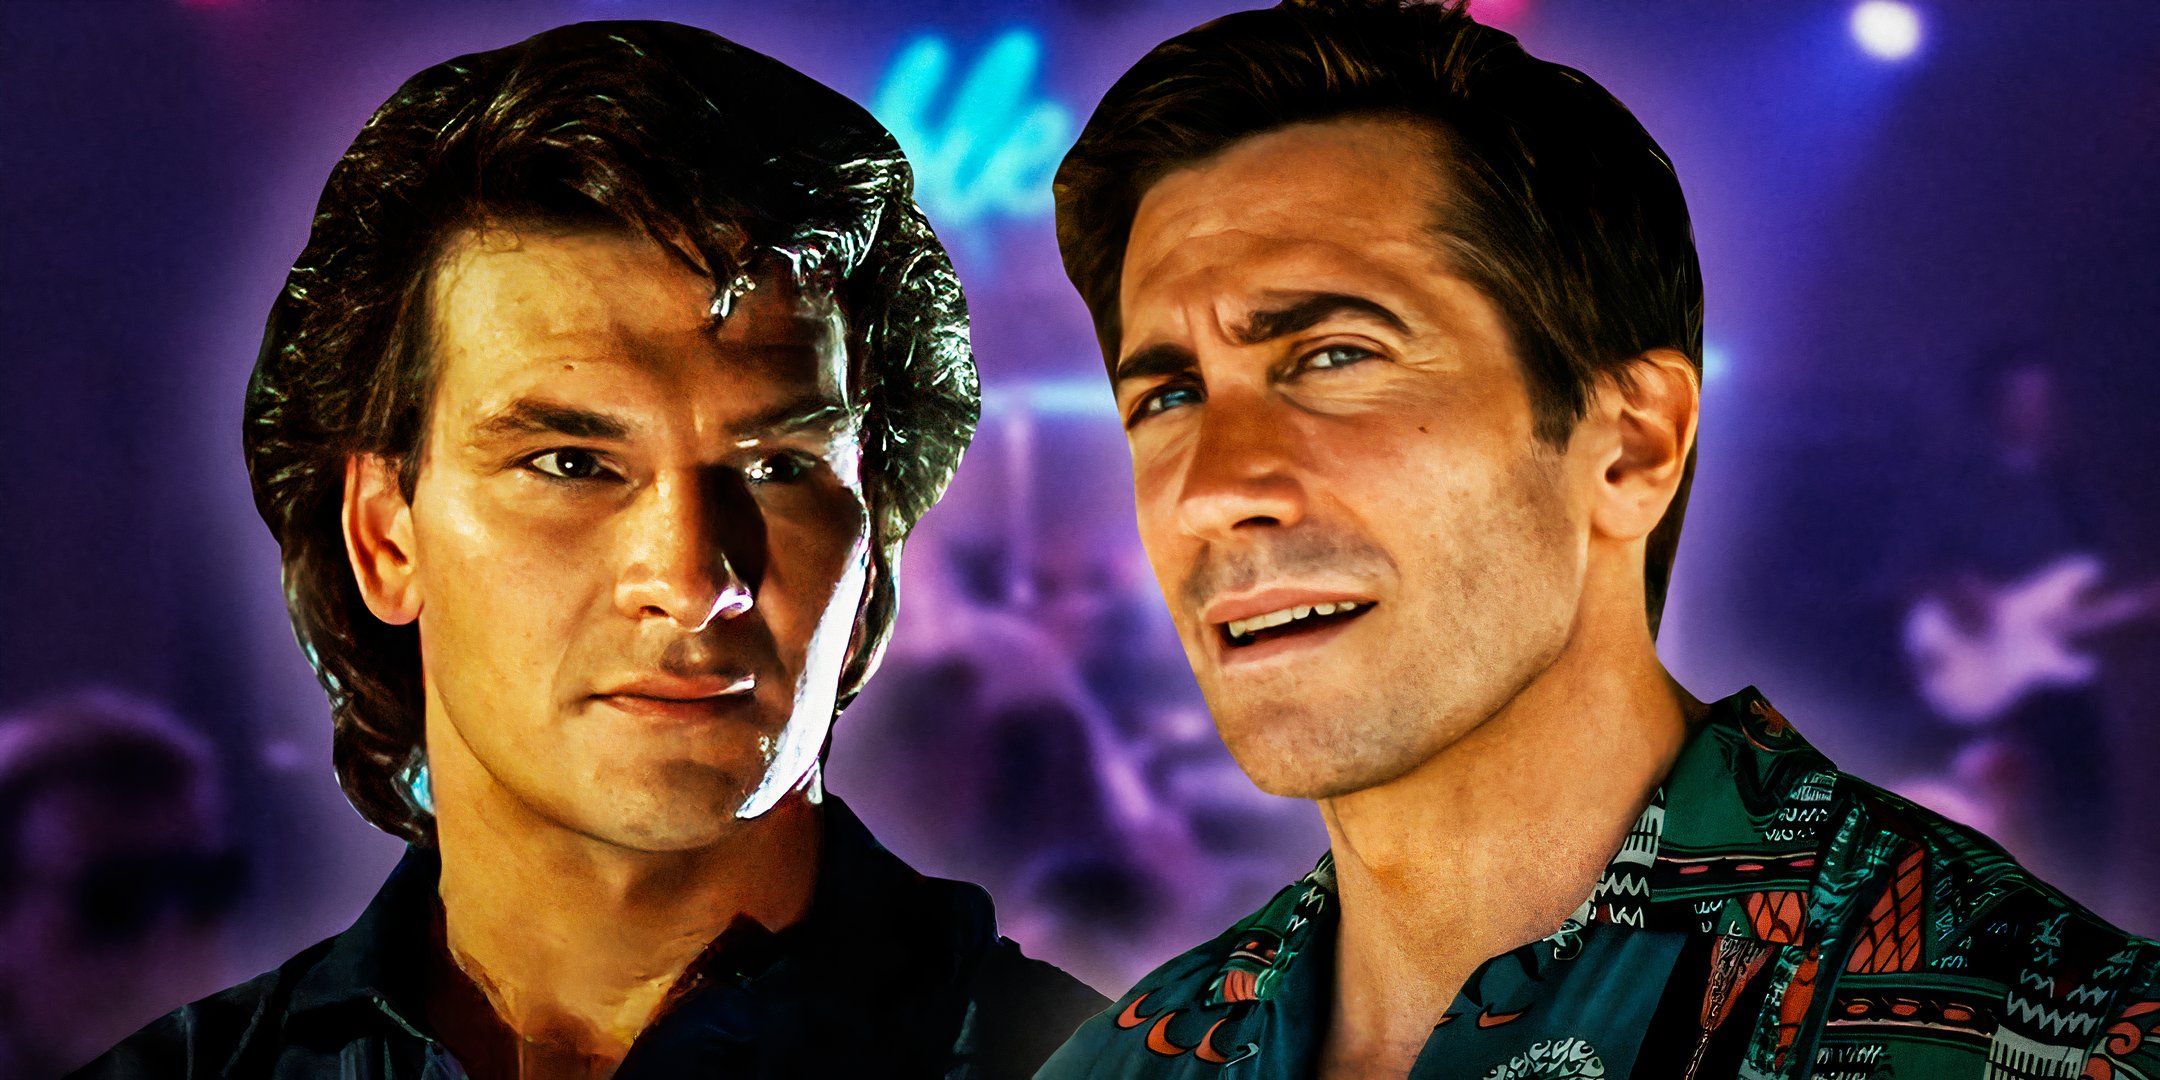 Jake-Gyllenhaal-as-Dalton-from-Road-House-2024-and-Patrick-Swayze-as-James-Dalton-from-Road-House